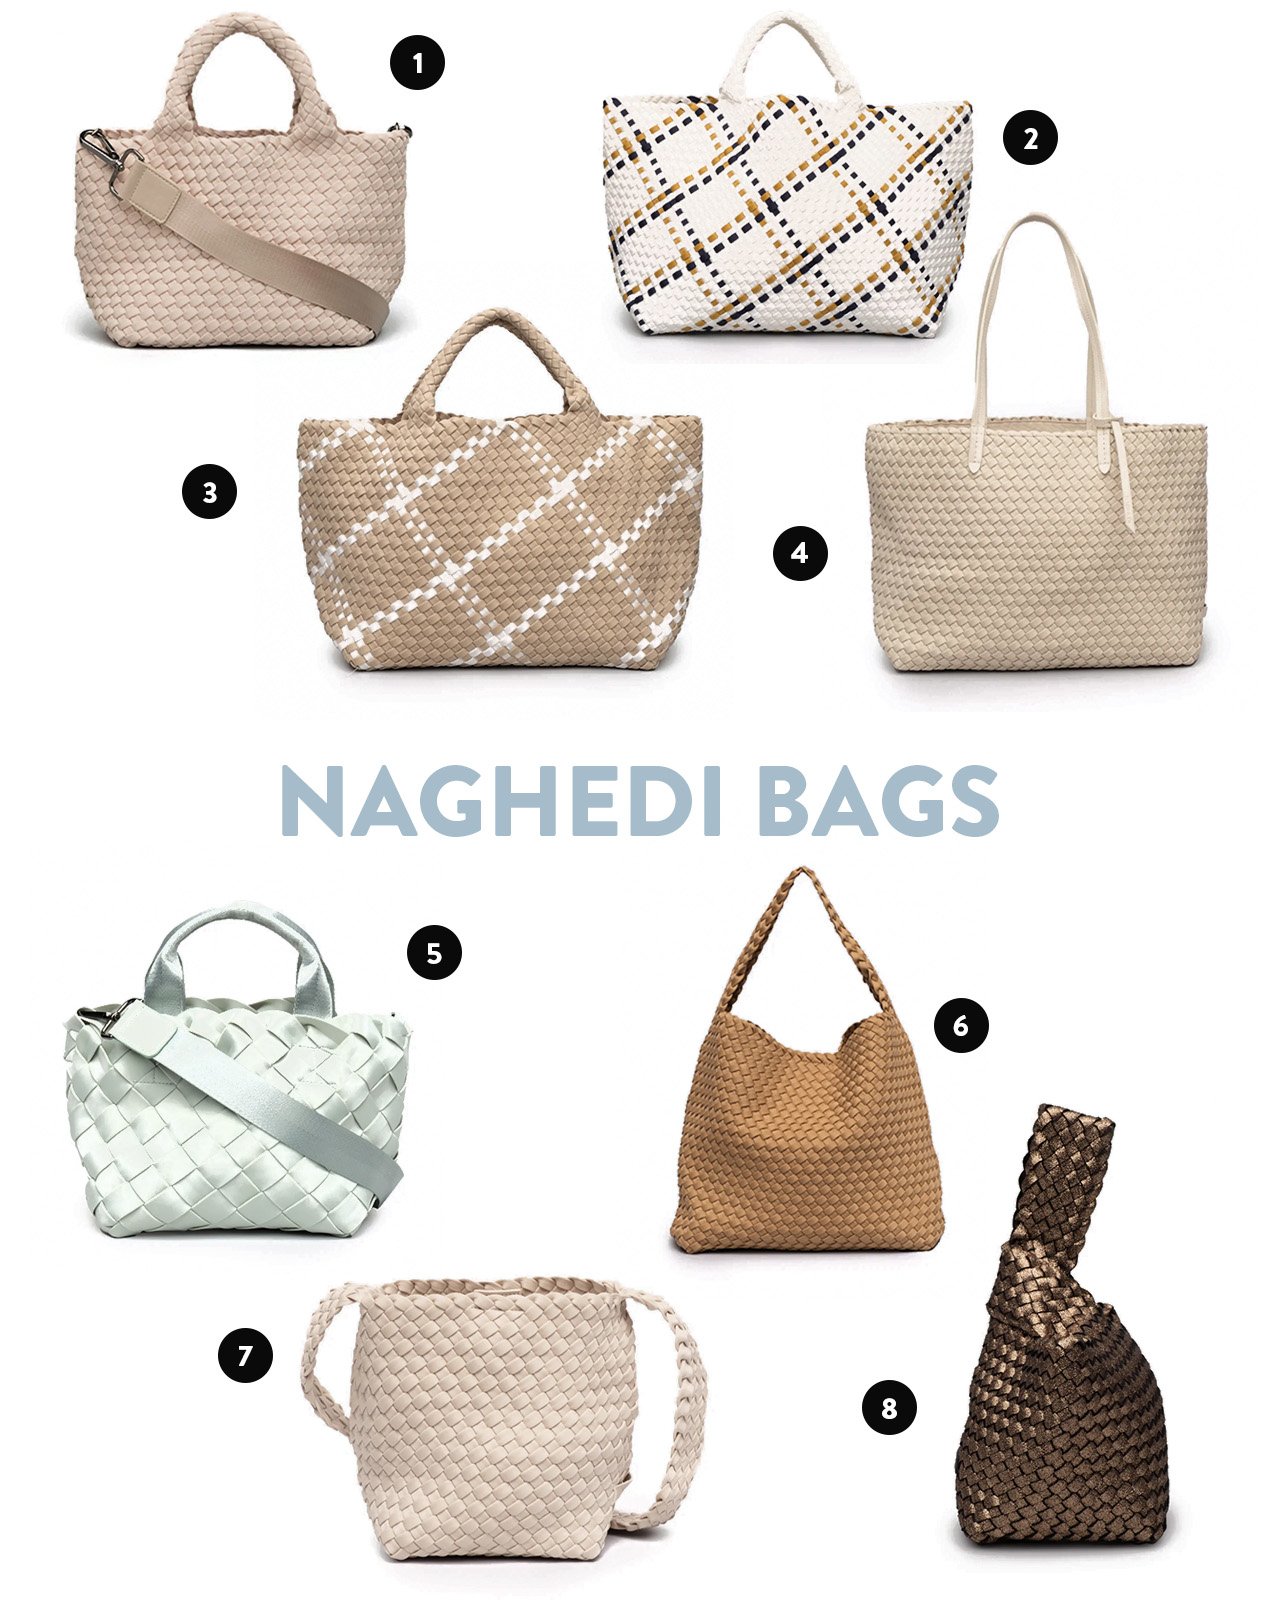 Naghedi Size Comparison for their St. Barth's Tote 😍 In-depth Video l, tote bags